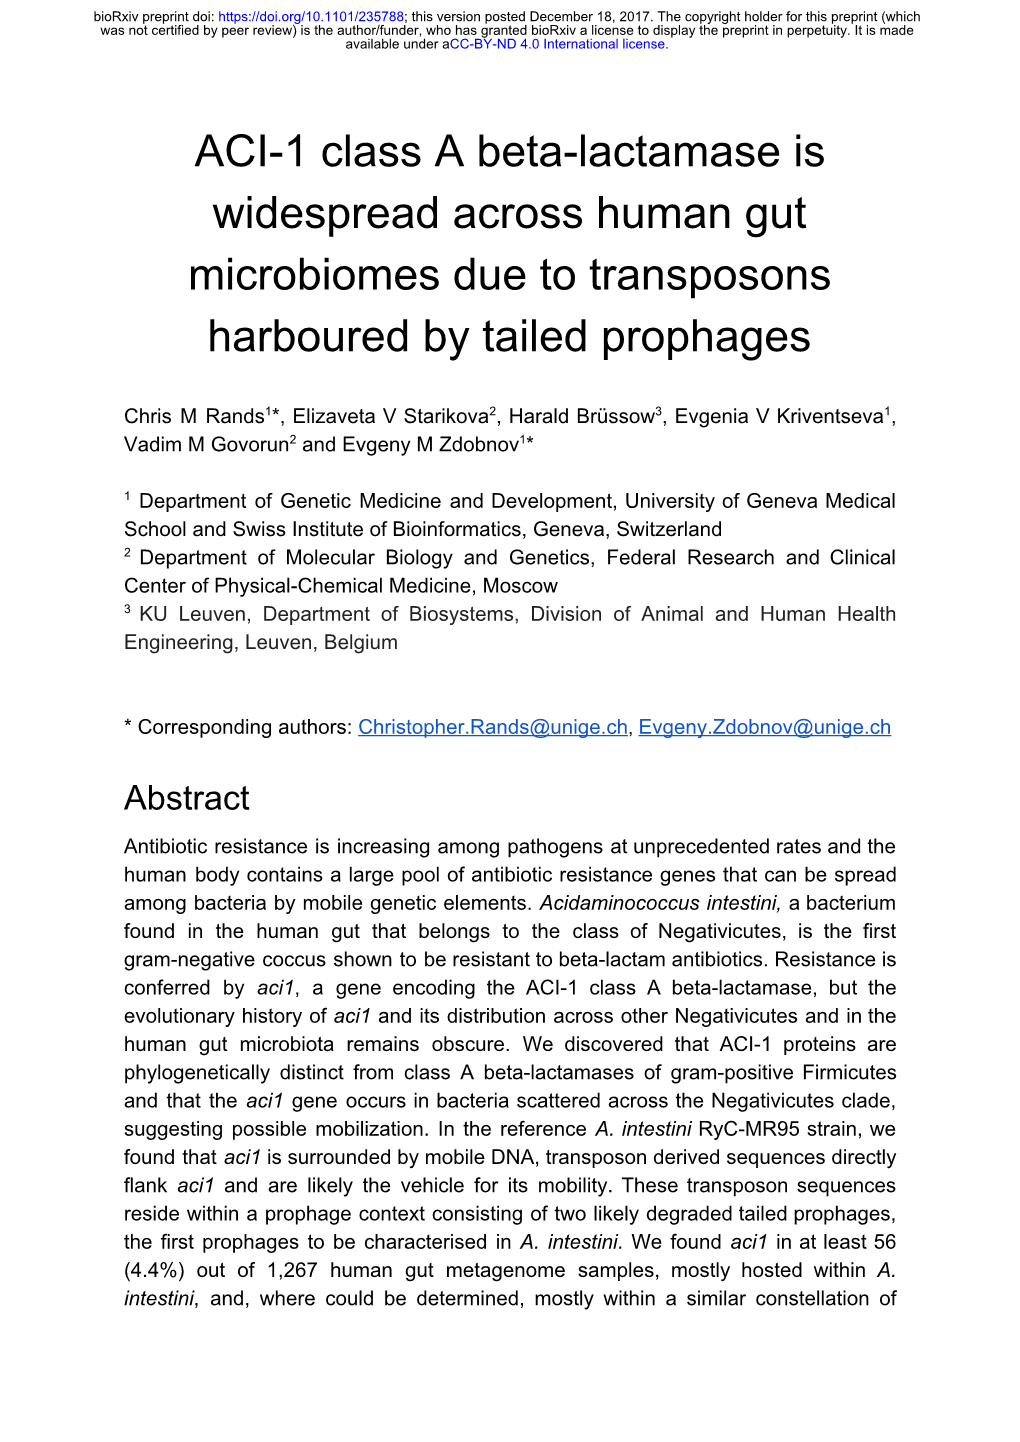 ACI-1 Class a Beta-Lactamase Is Widespread Across Human Gut Microbiomes Due to Transposons Harboured by Tailed Prophages